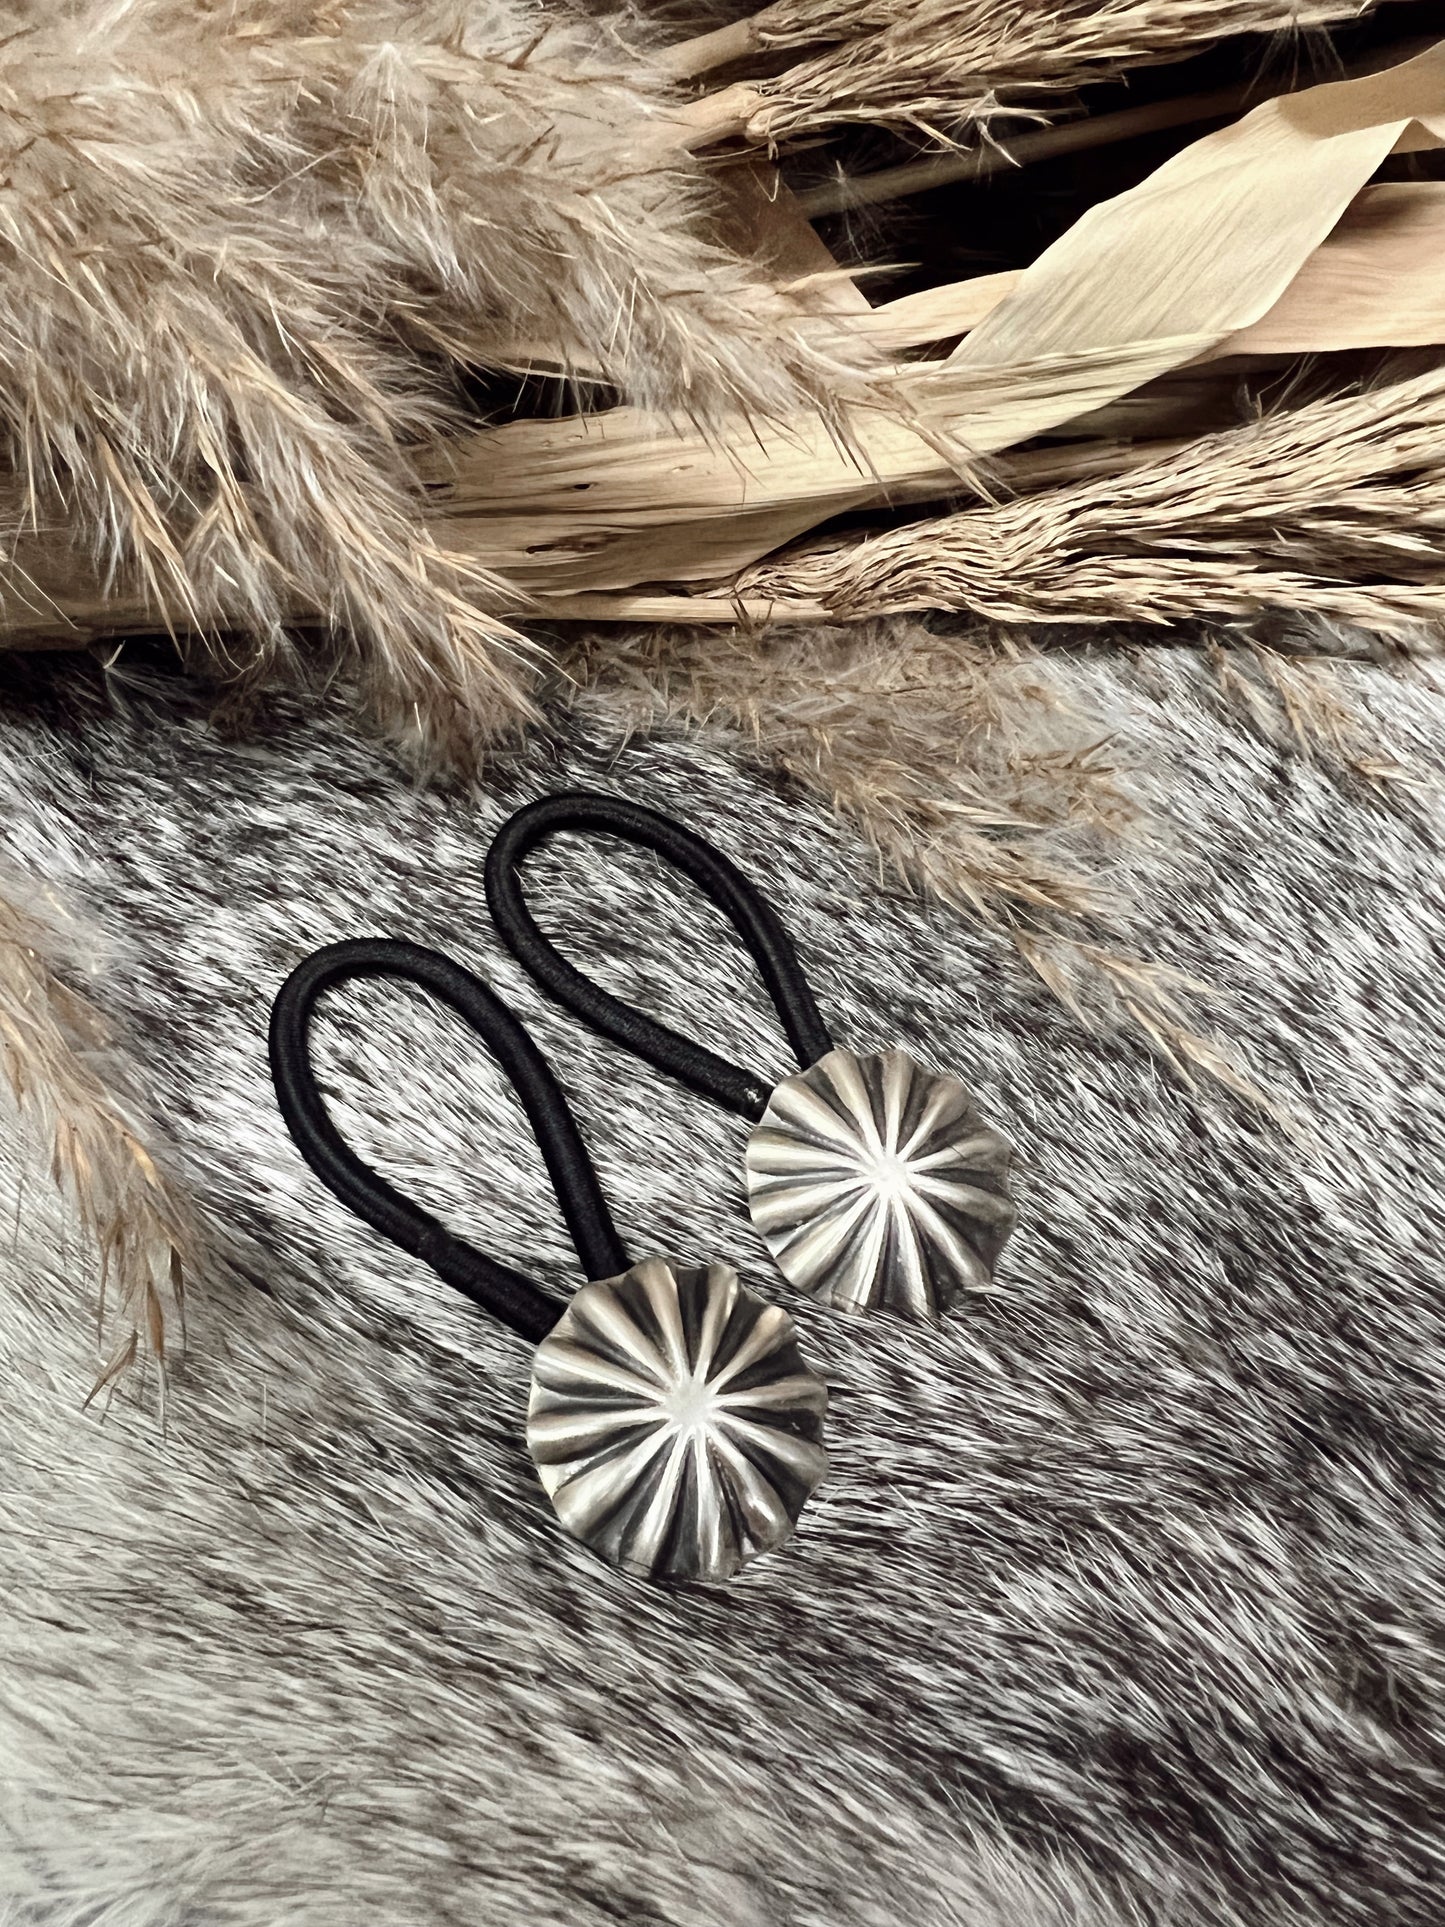 The Sterling Silver Concho Hair Tie